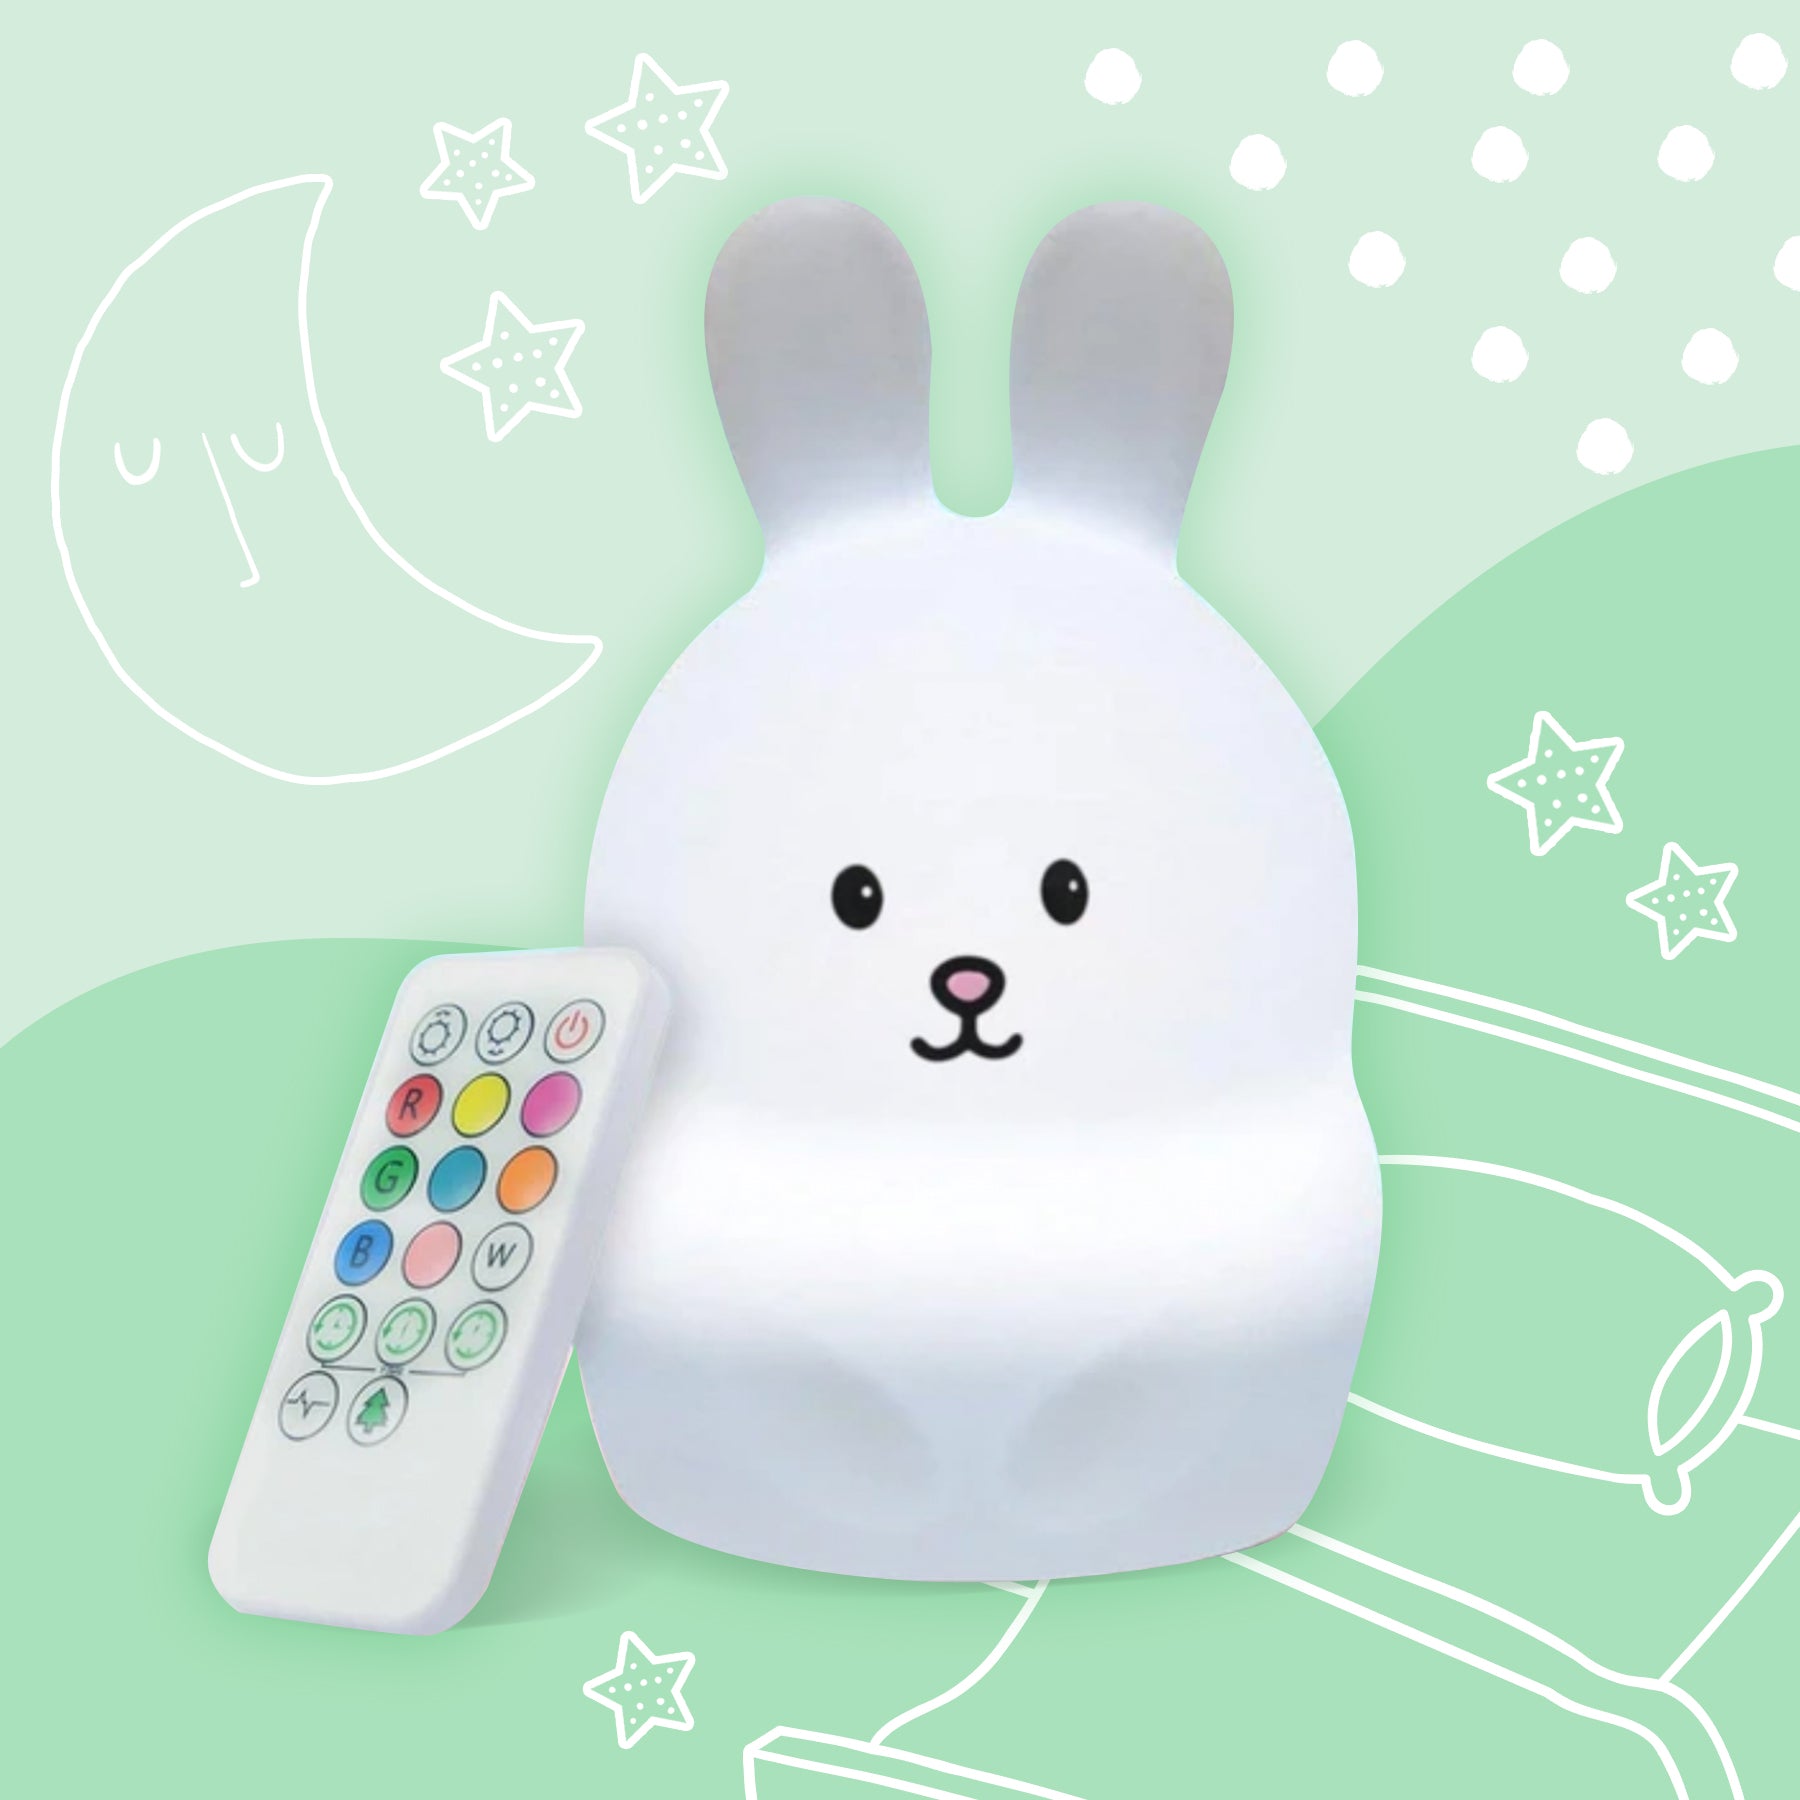 white Tap Color Control 100% BPA-Free VEZARON LED Colorful Baby Night Light Rechargeable for up to 6-Hour Usage Dim Mood Lamp Bedside lamp Portable Silicone Cute Nursery Night Lamp 